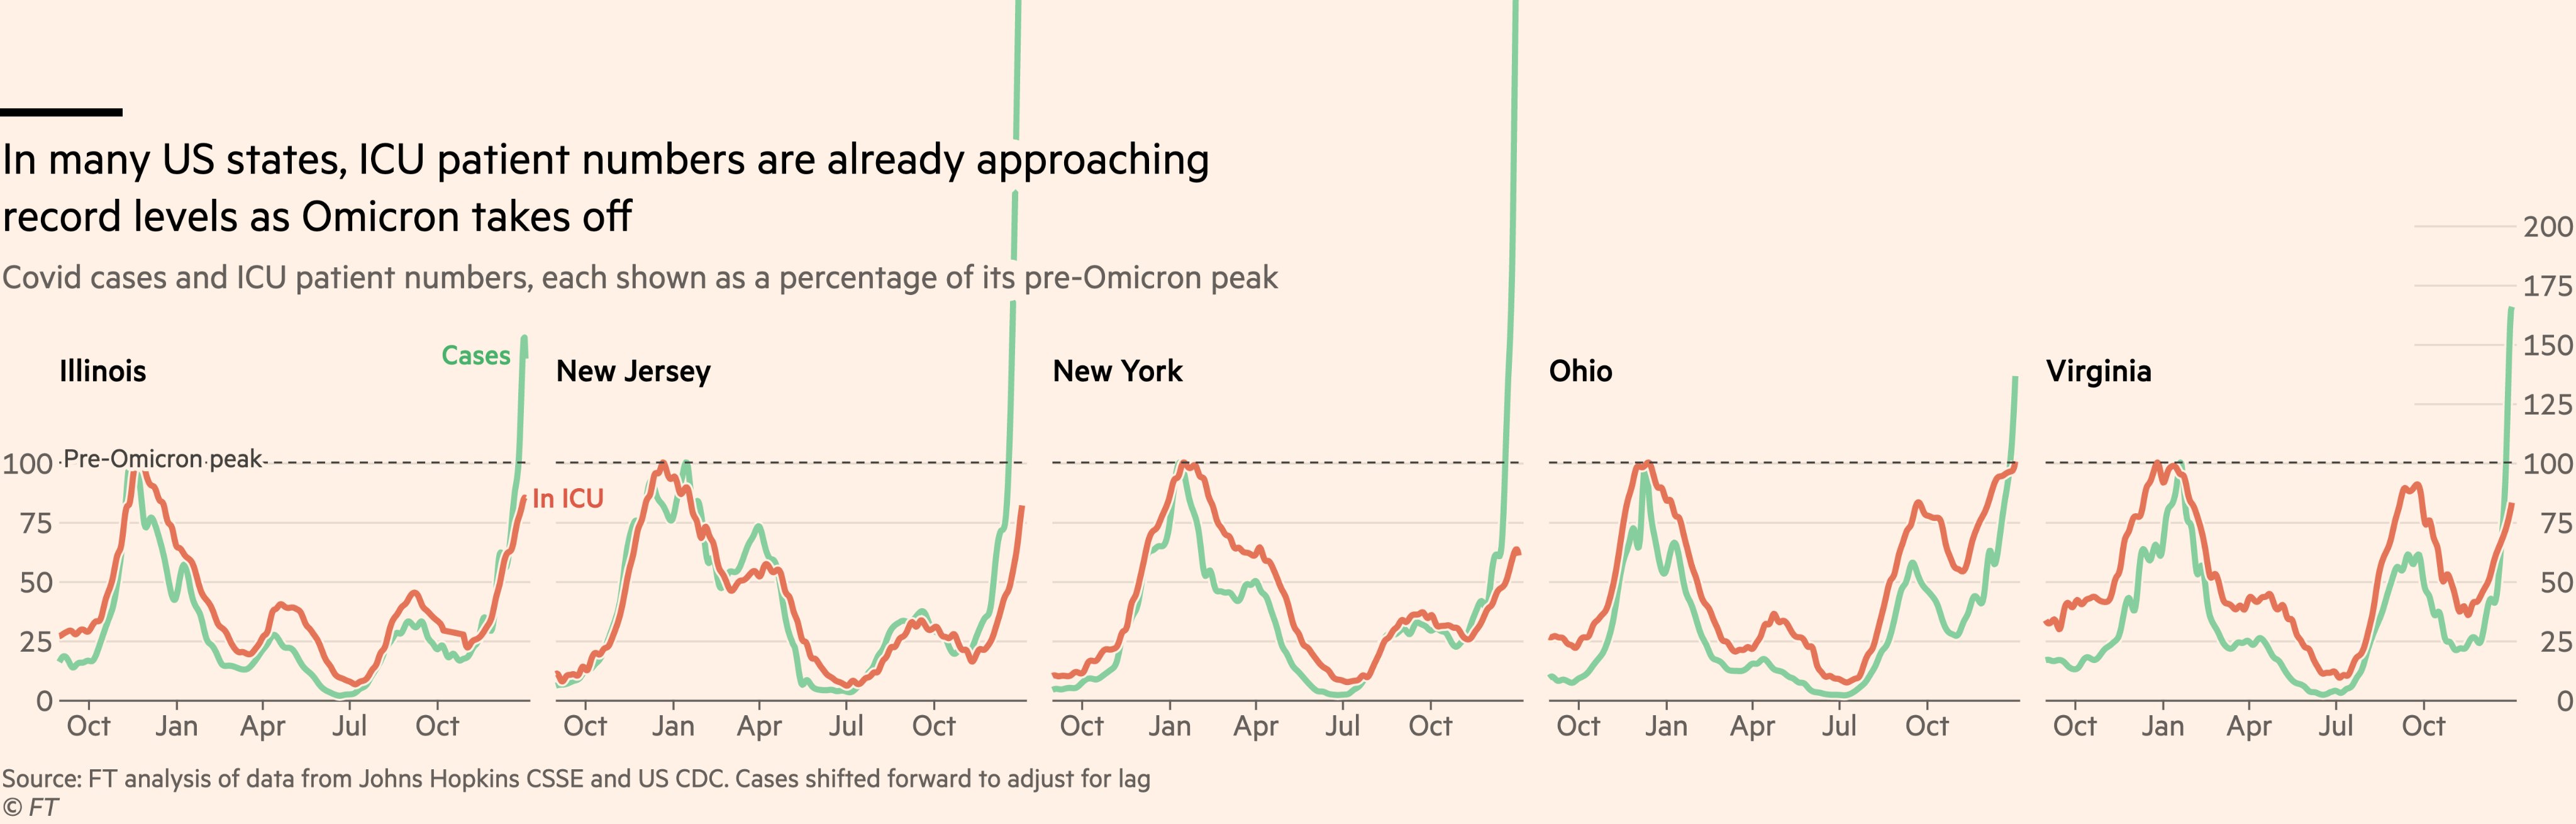 The same technique applied in a chart titled 'In many US states, ICY patient numbers are already appraoching record levels as Omicron takes off'